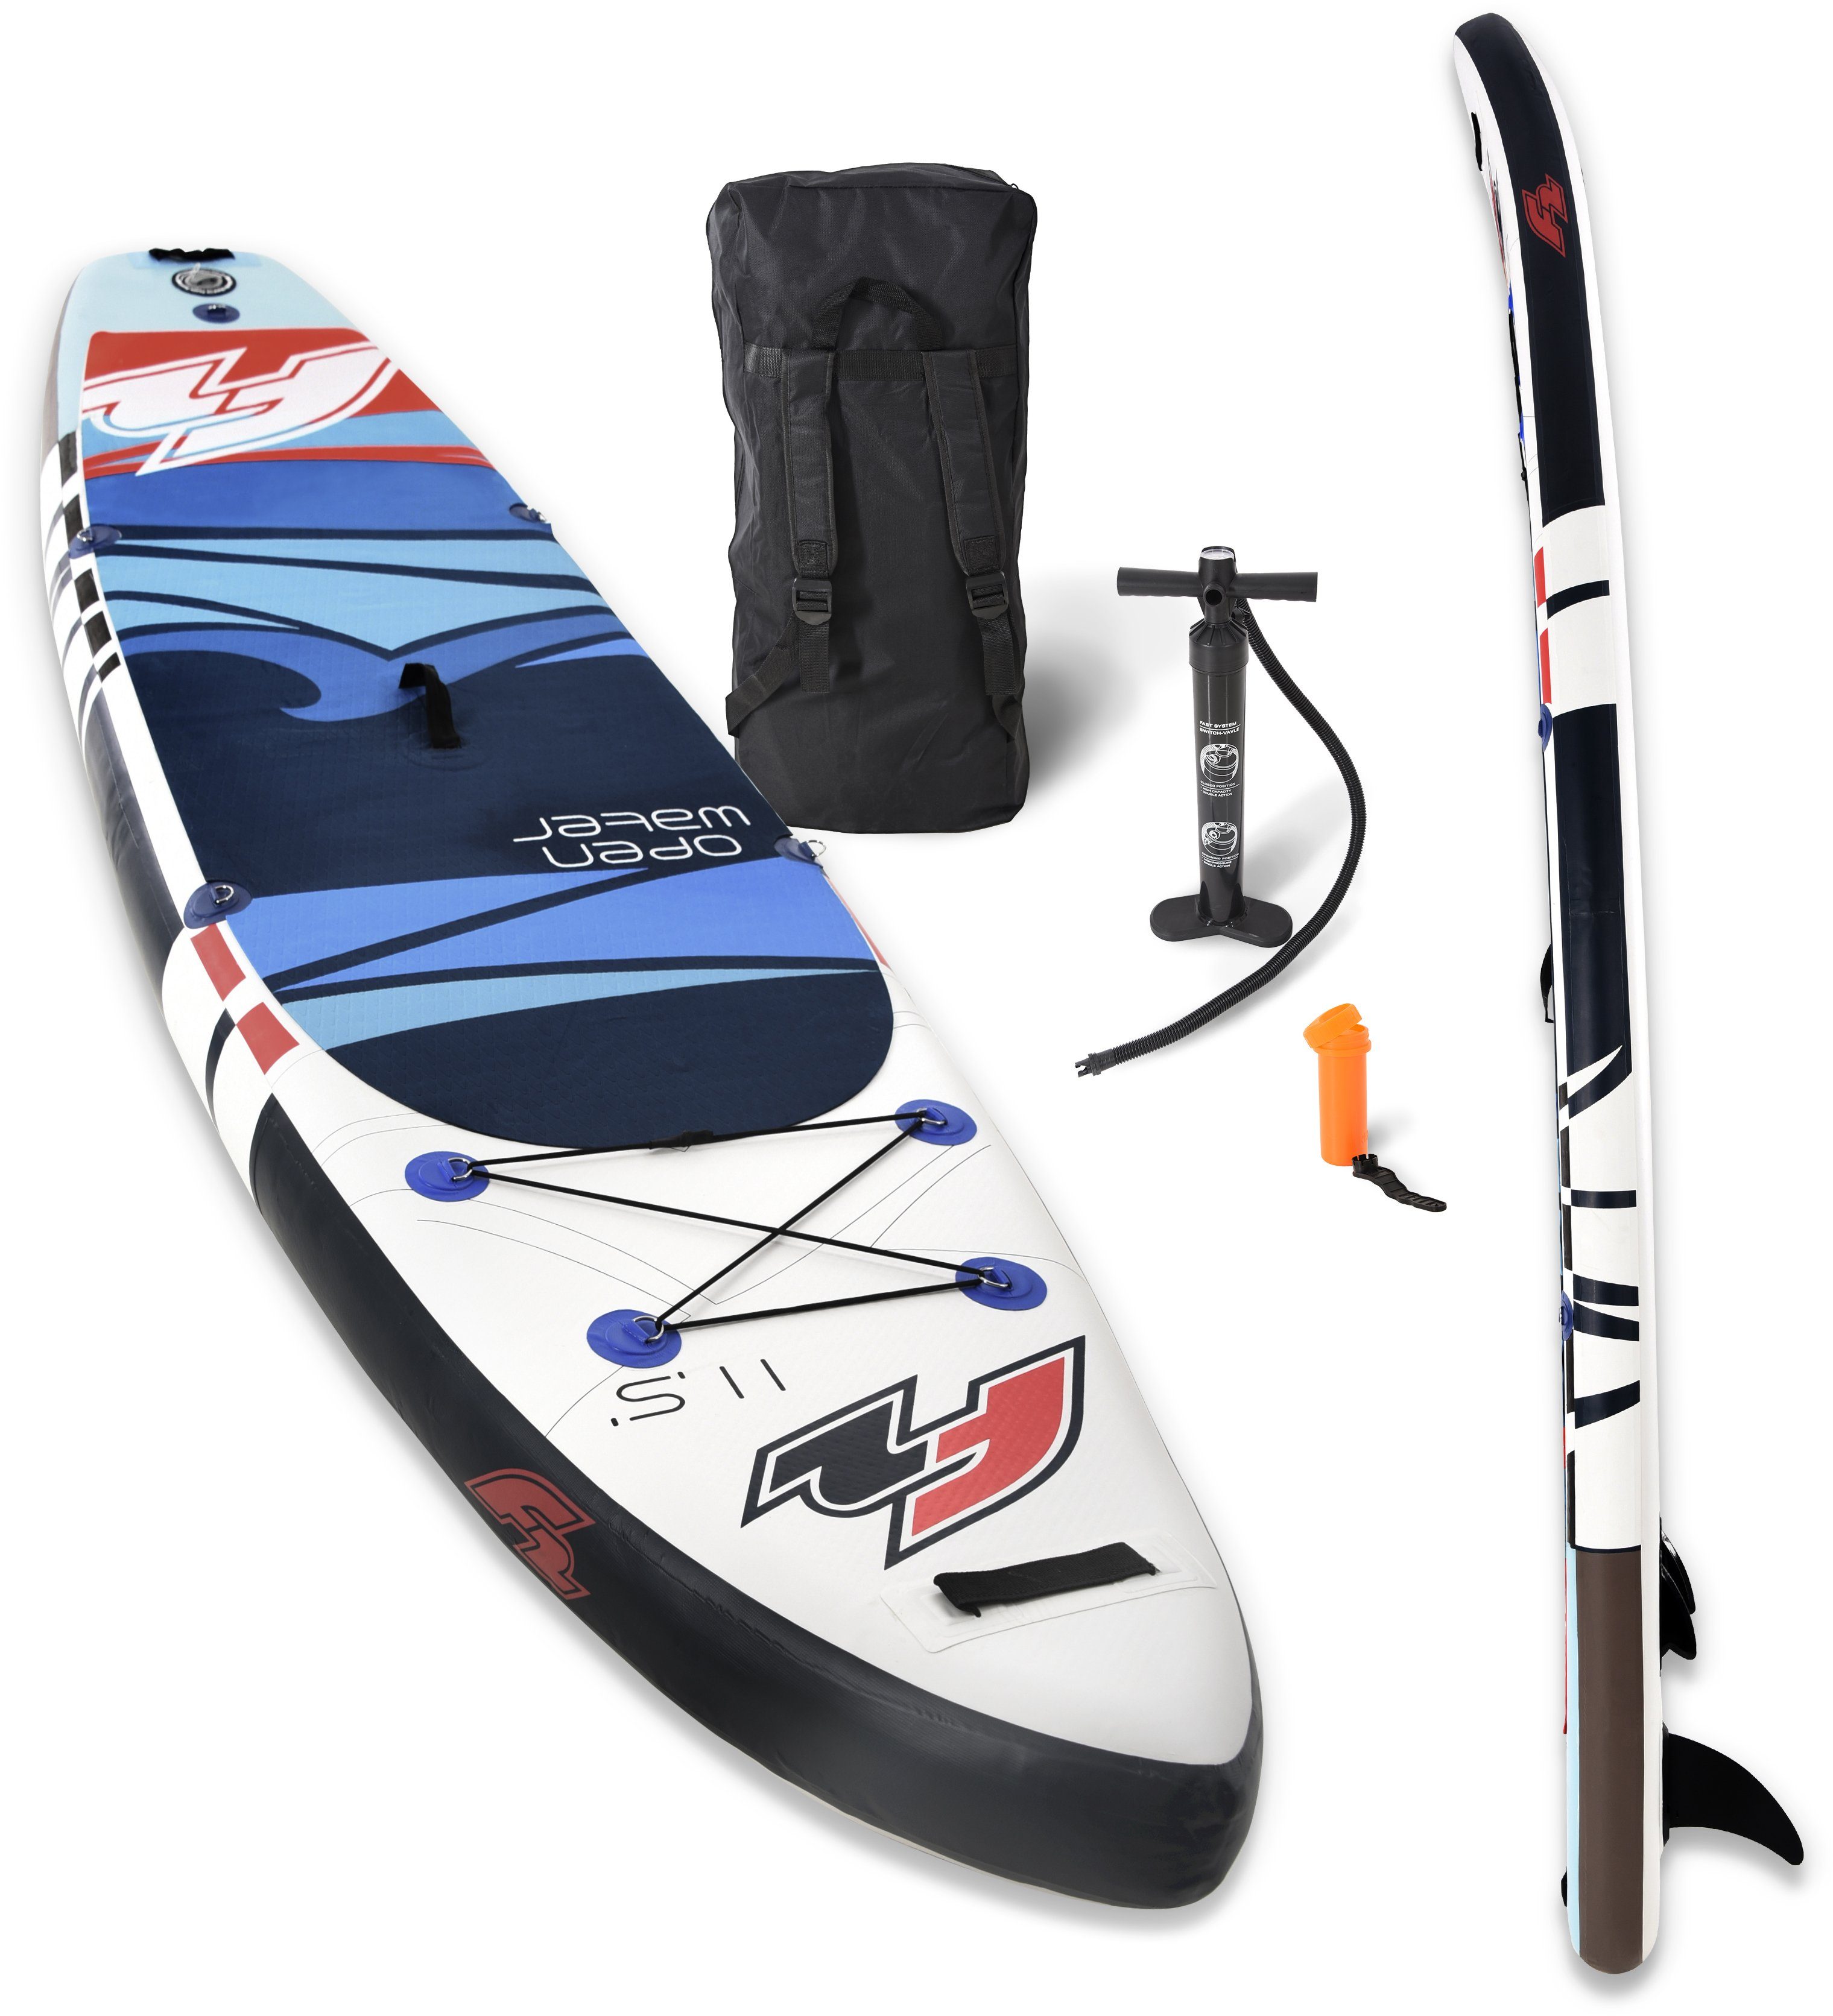 Paddel Water ohne Open F2 SUP-Board